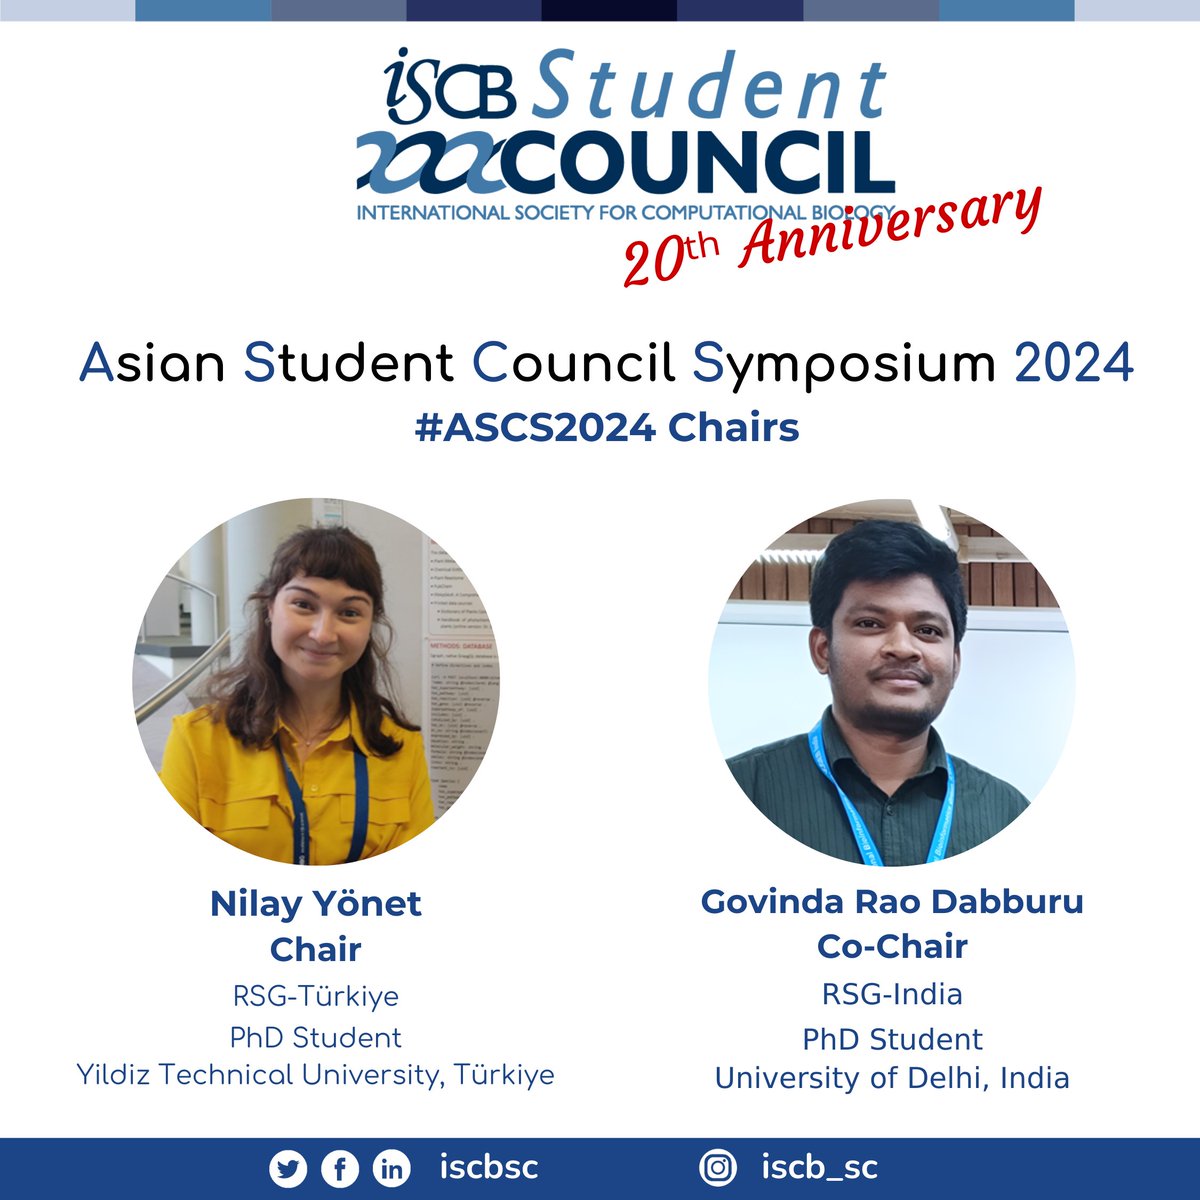 📌Our community is excited to continue its 20th-anniversary celebrations by hosting the first-ever hybrid edition of our Asian Student Council Symposium (#ASCS2024) 🎉 📢Pleased to introduce #ASCS2024 chairs: @niraito from @RSGTurkey & @Govind_GRD from @ISCB_RSG_India. 👉🏾